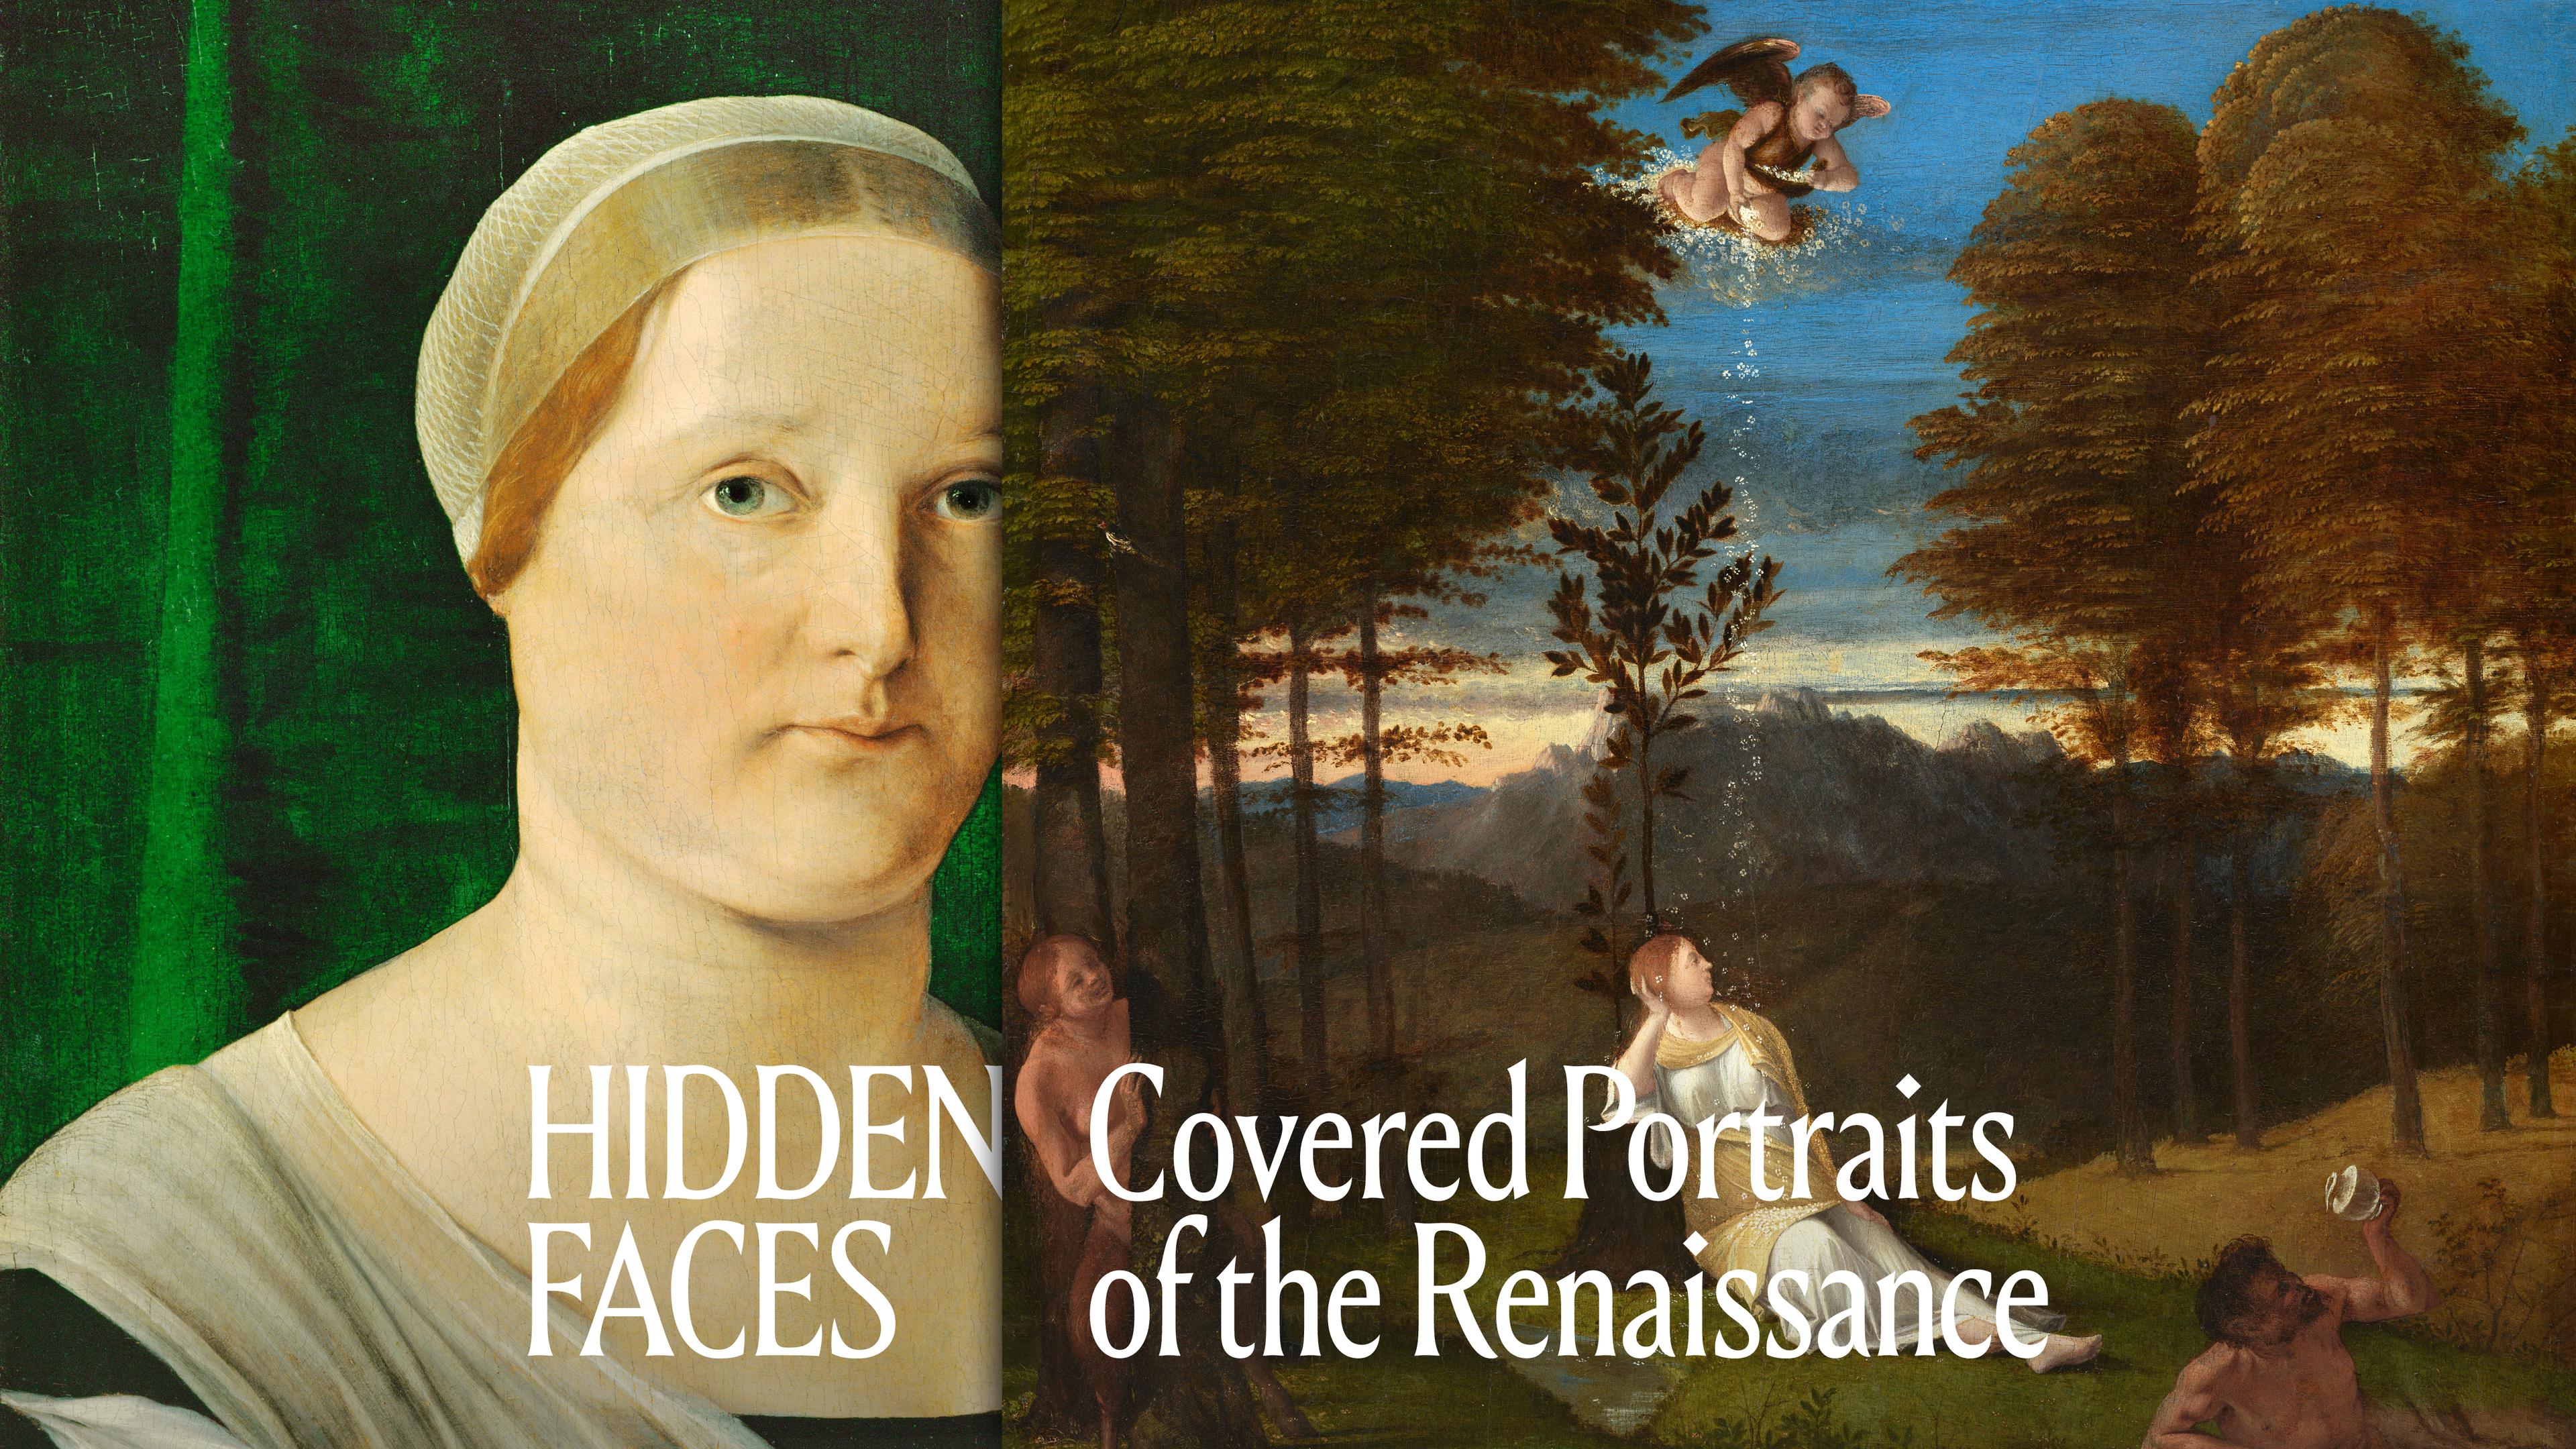 A composite image featuring renaissance portrait paintings with partially obscured faces, set against a countryside backdrop, titled "hidden faces: covered portraits of the renaissance.